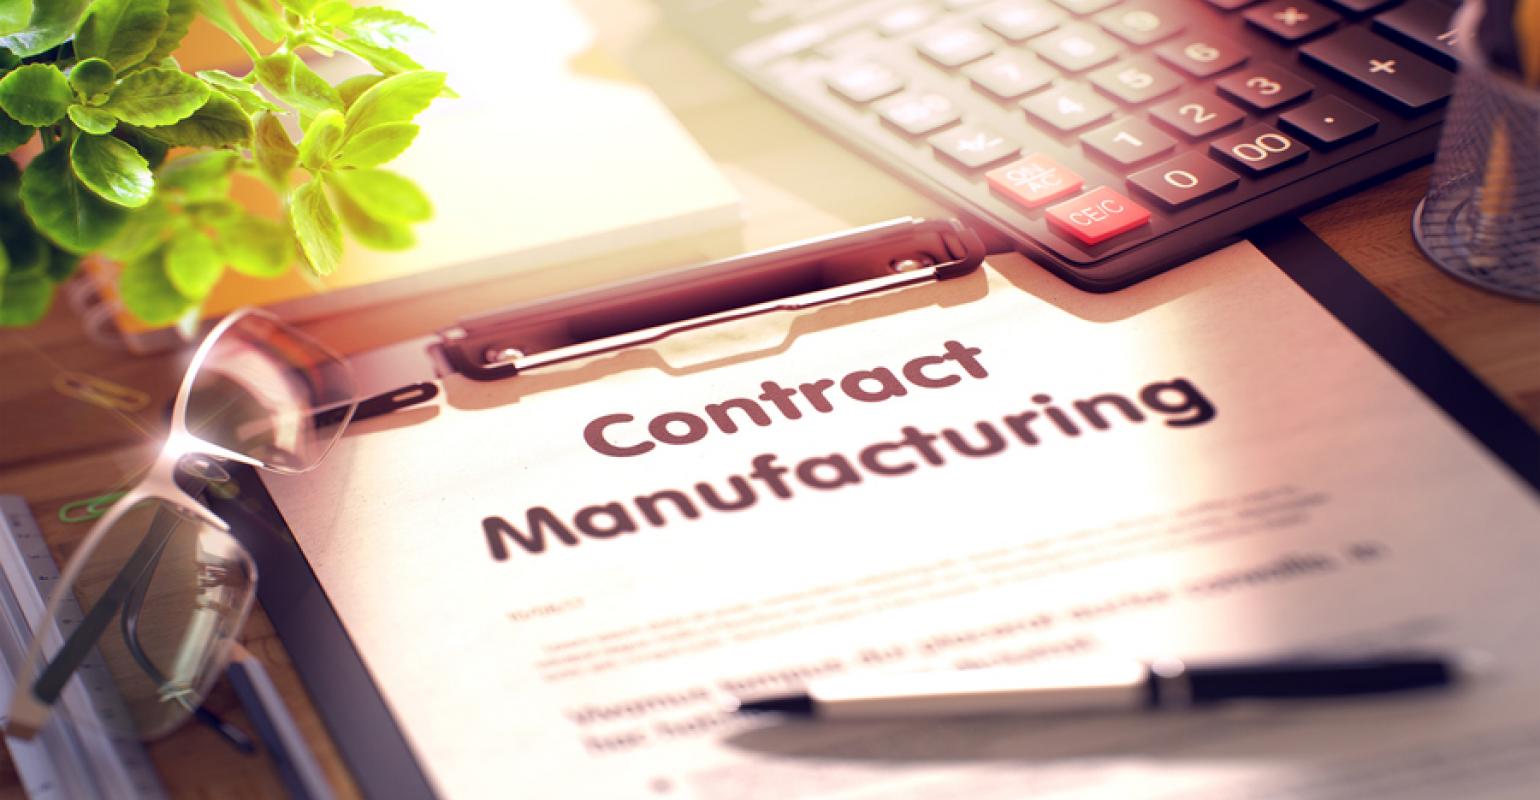 Contract manufacturing